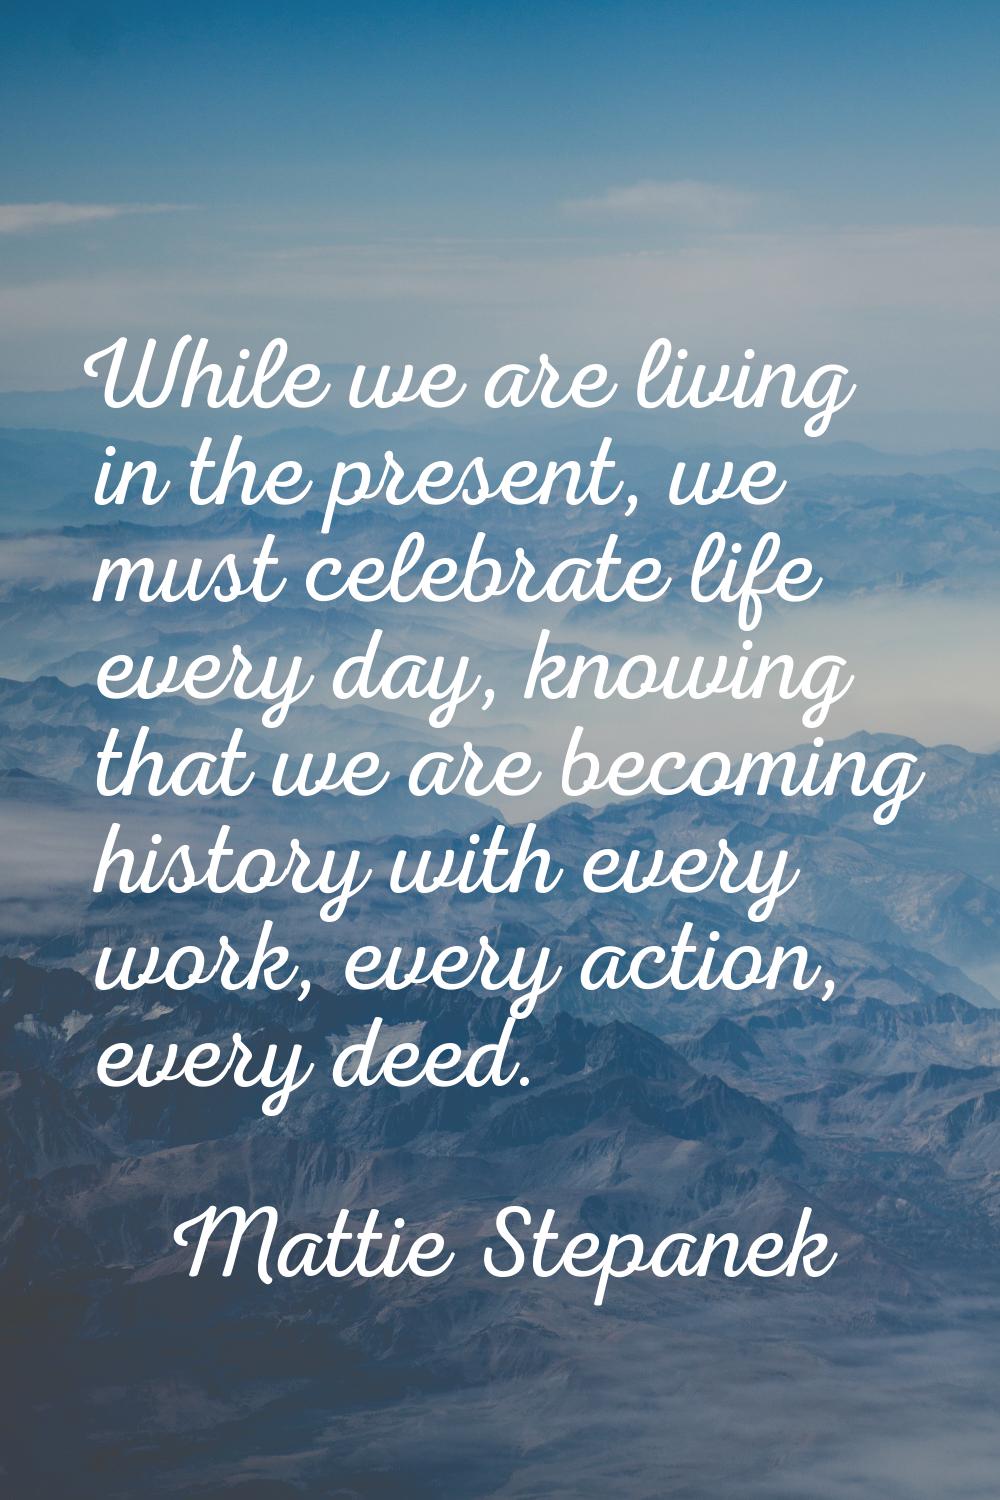 While we are living in the present, we must celebrate life every day, knowing that we are becoming 